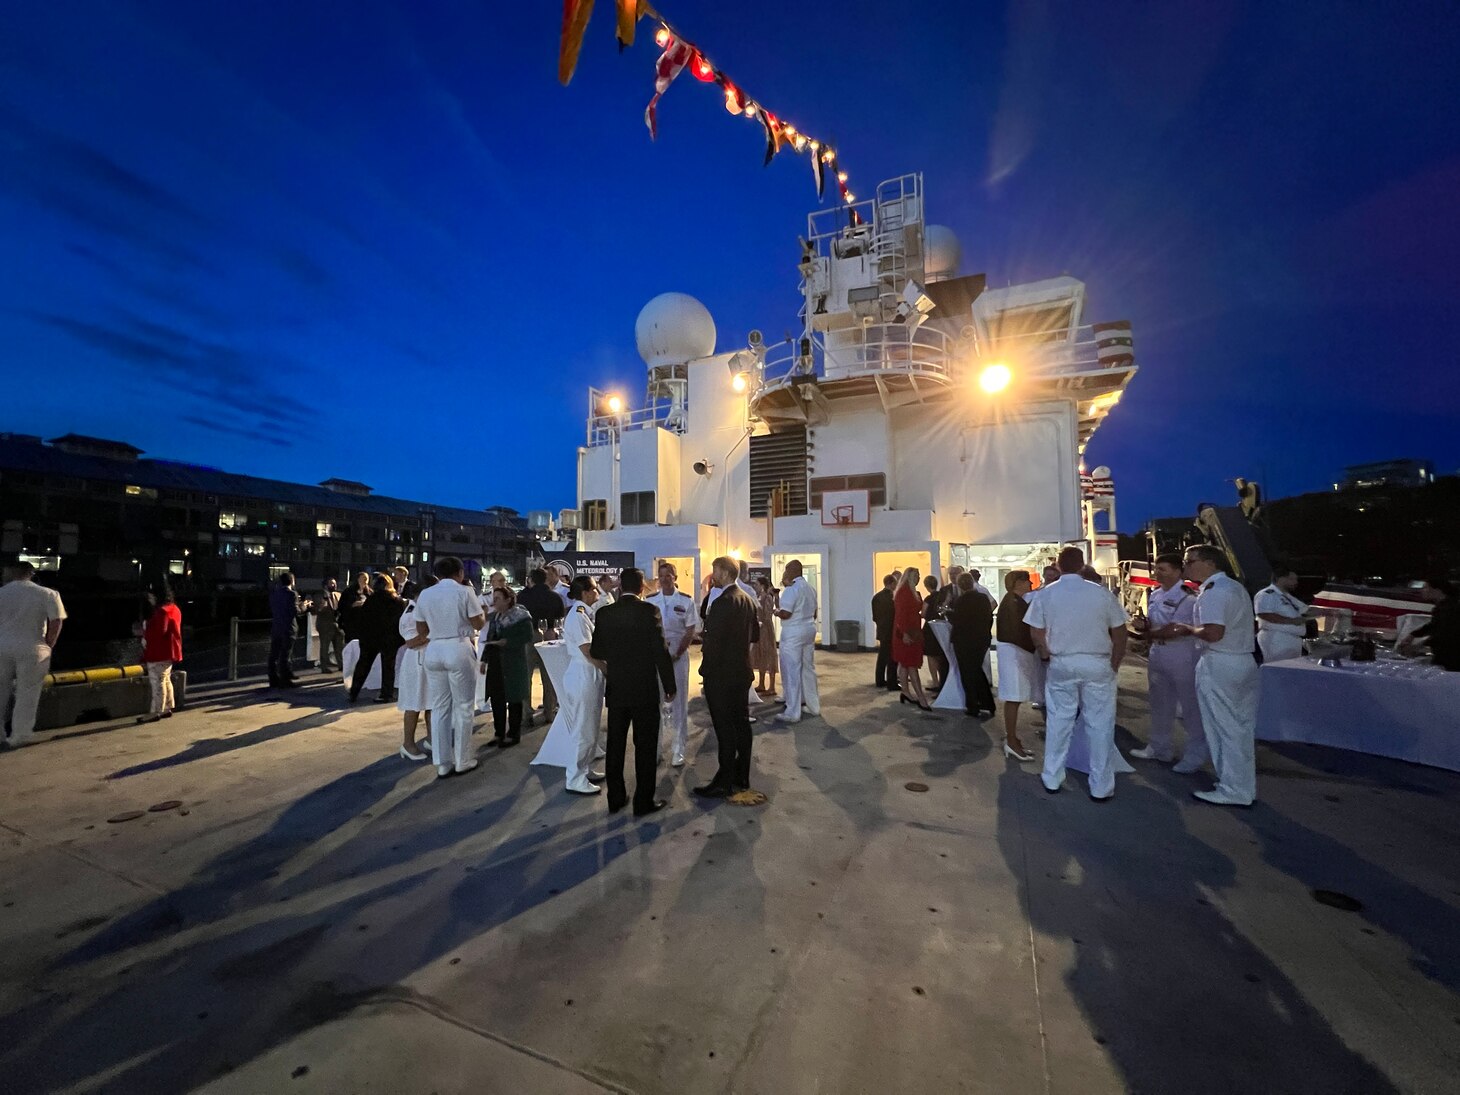 USNS Mary Sears was alongside in Sydney, Australia for a scheduled port visit and later on in the visit held a reception for members Naval Oceanography and the Australian Defence Organisation.